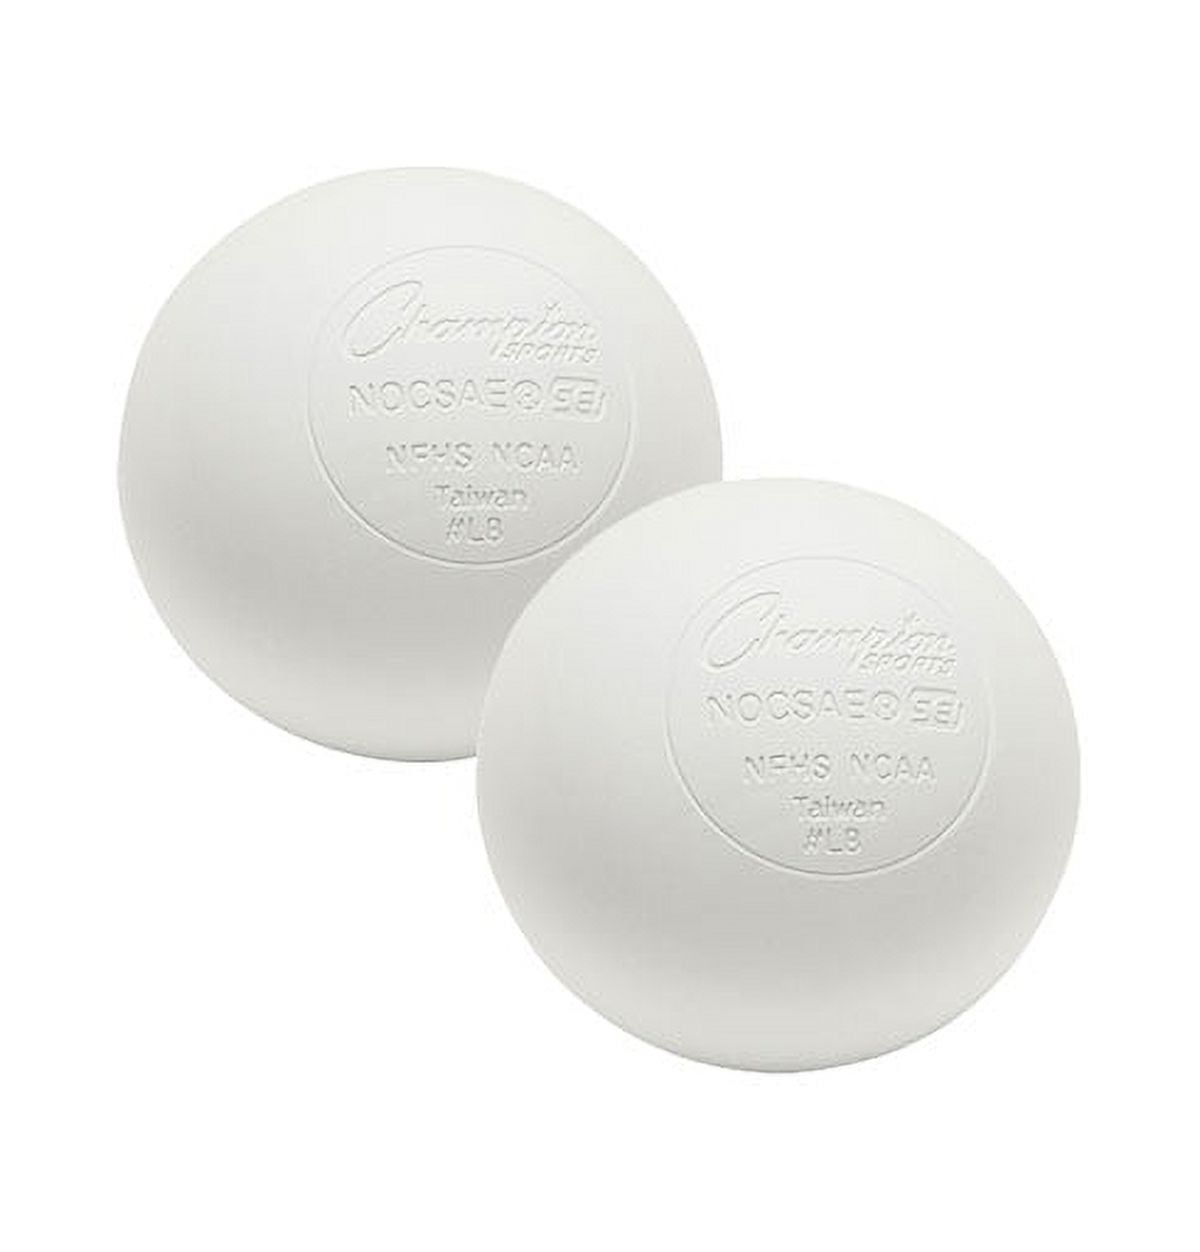 Picture of Champion Sports LBWNOCSAE 2.5 in. Official Lacrosse Ball, White